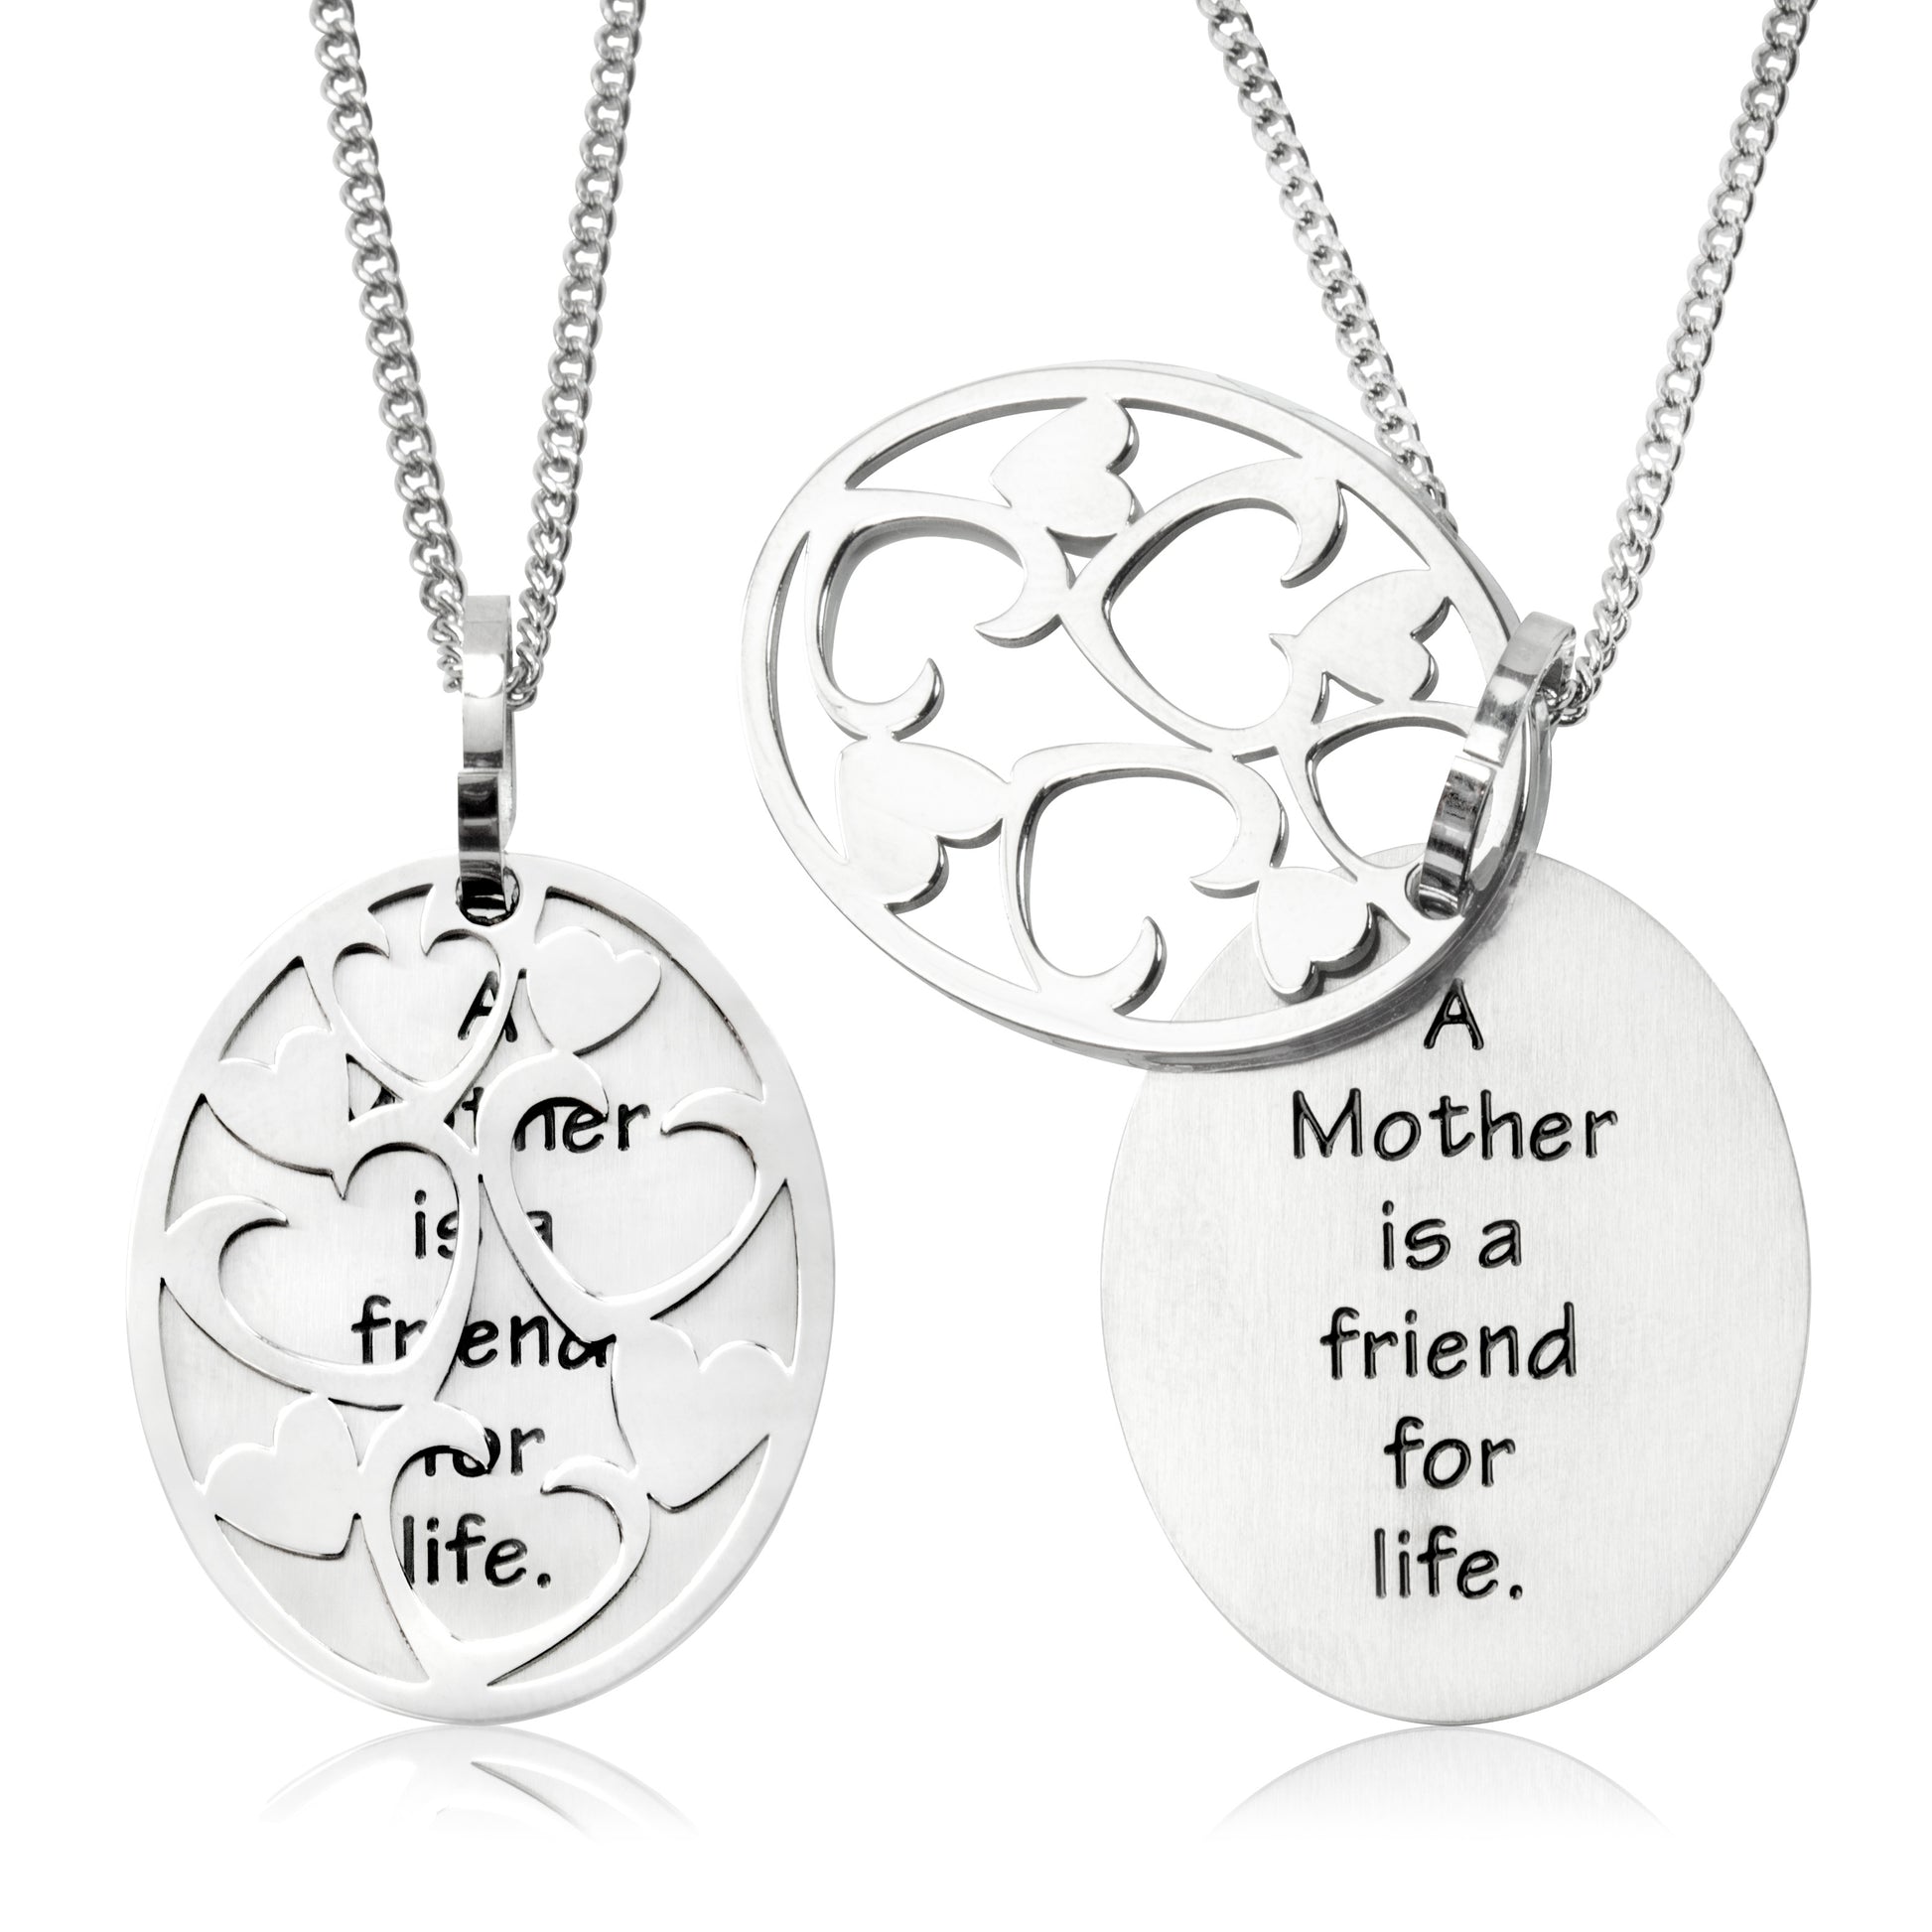 mothers day gifts-heart pendant-stainless steel necklace-gifts for women